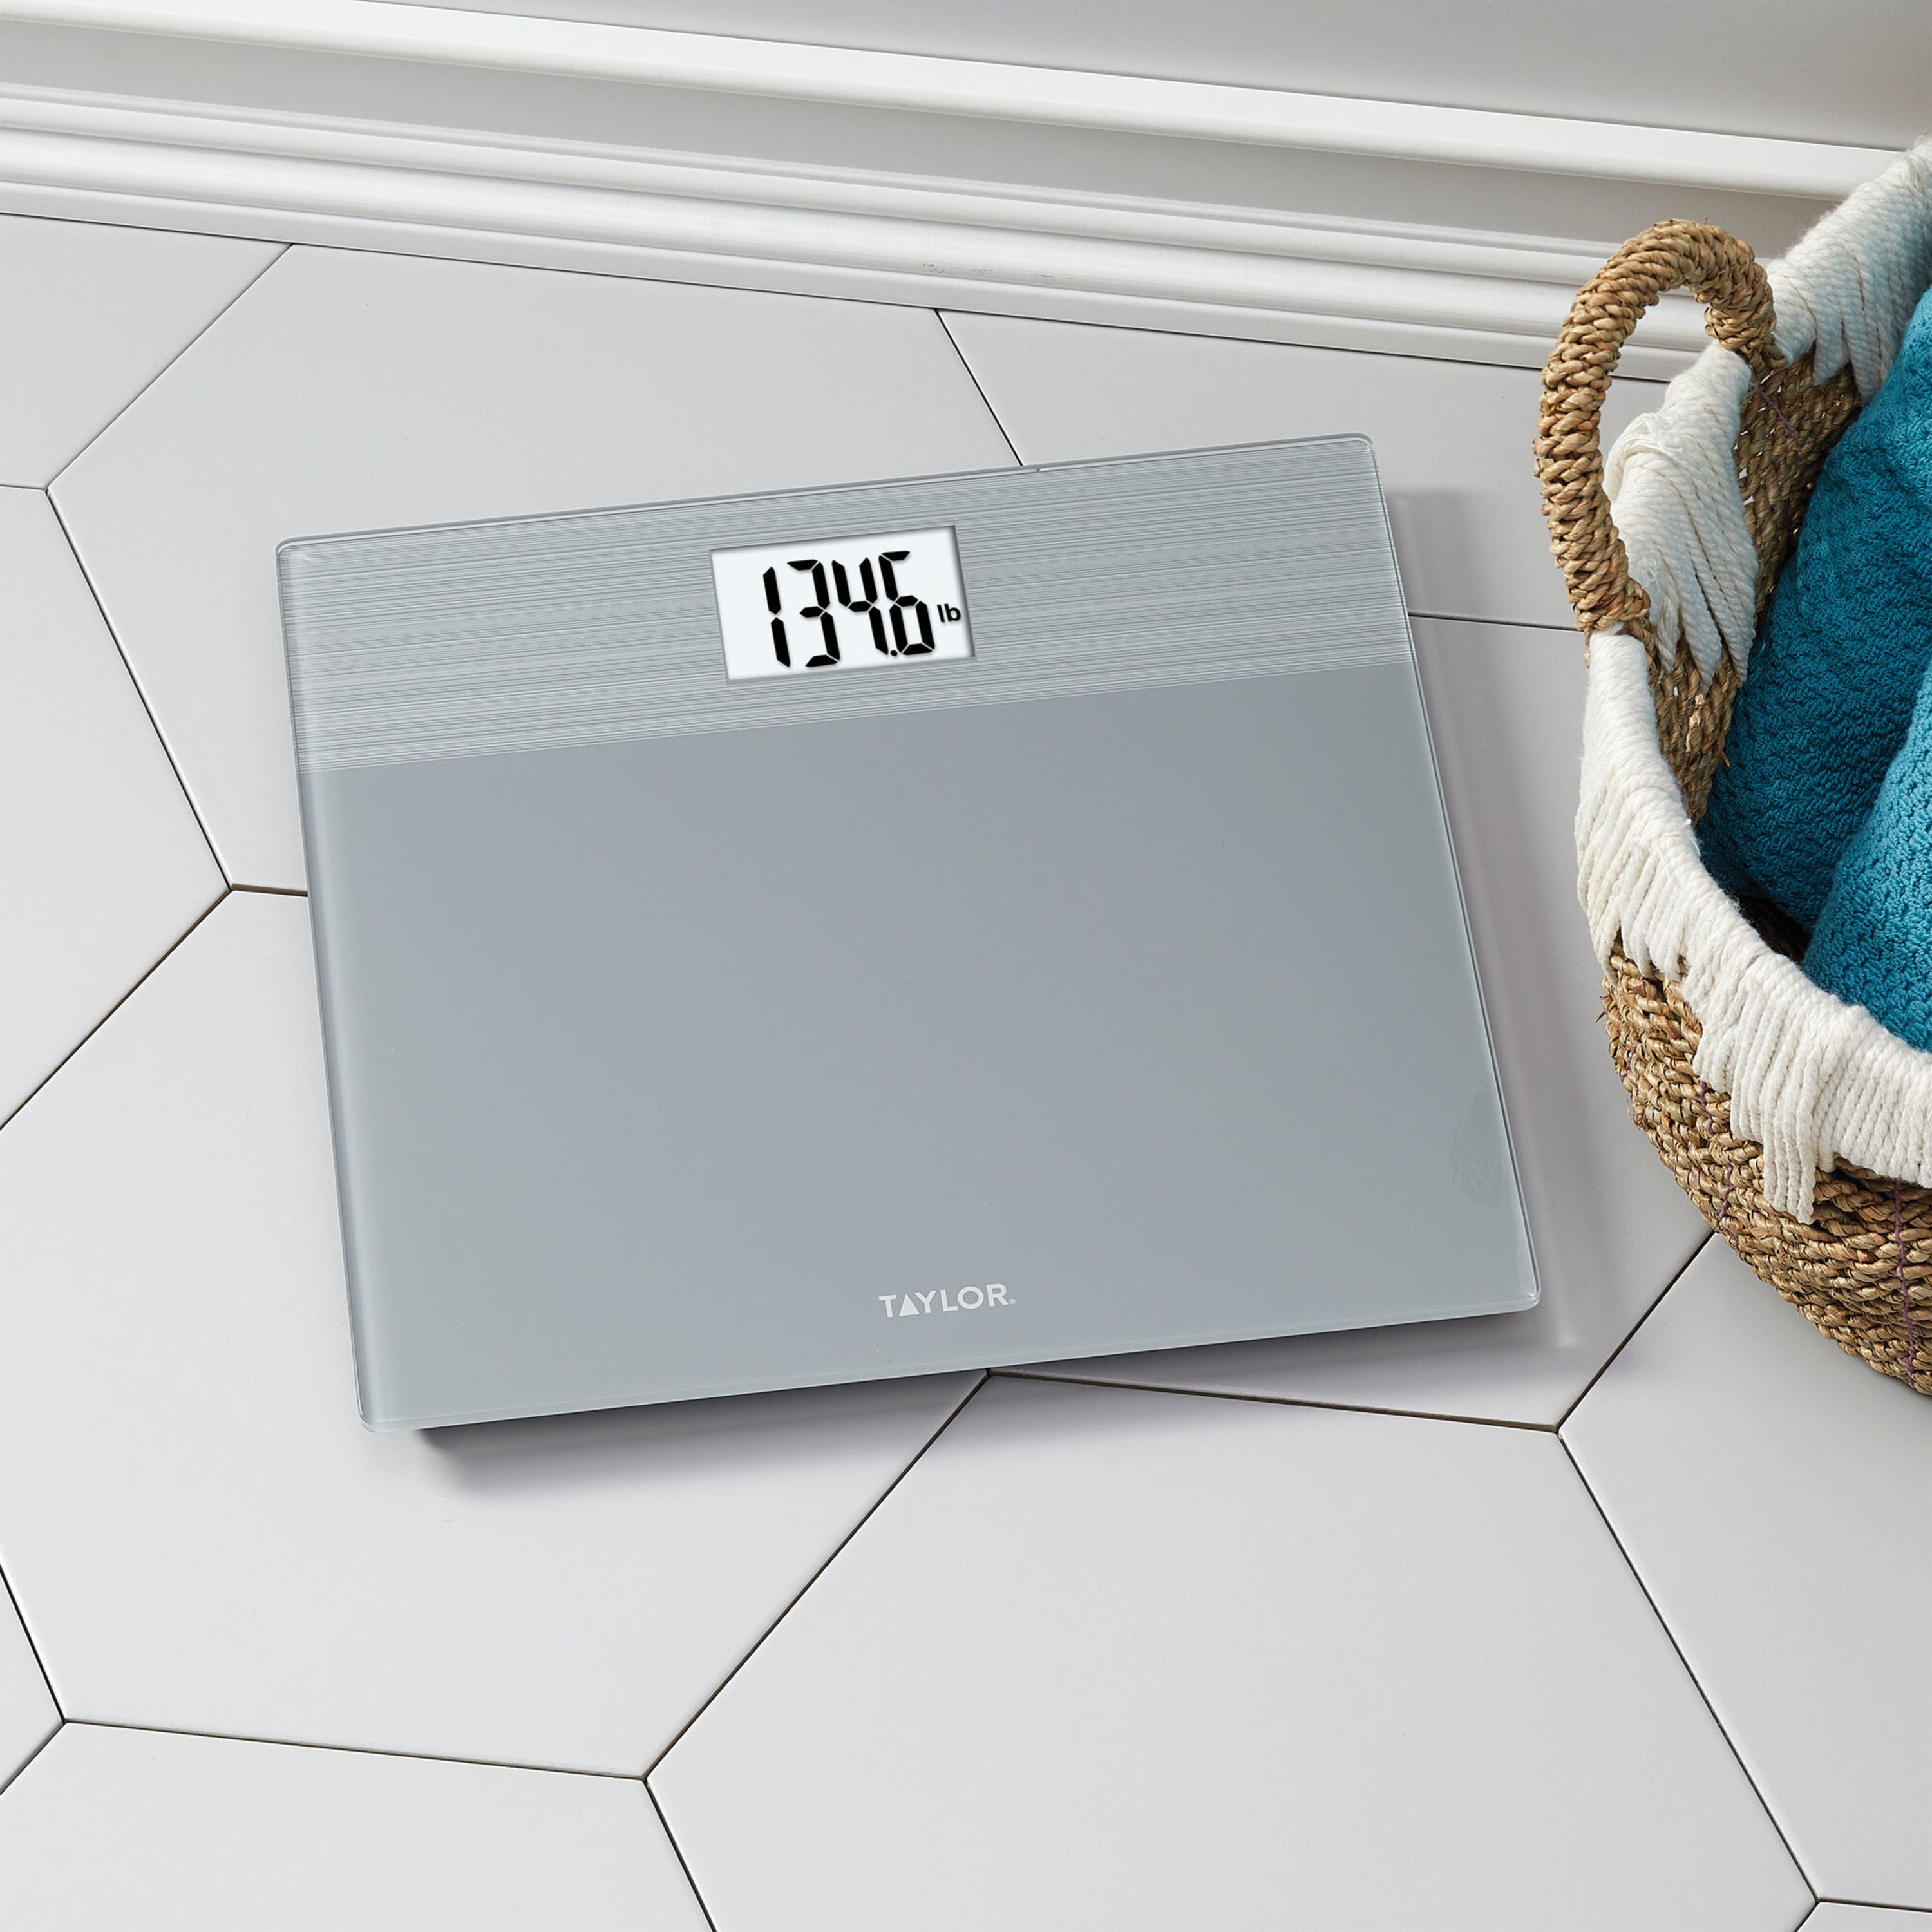 Taylor Digital Glass Scale with Textured Herringbone Design, 500 lb